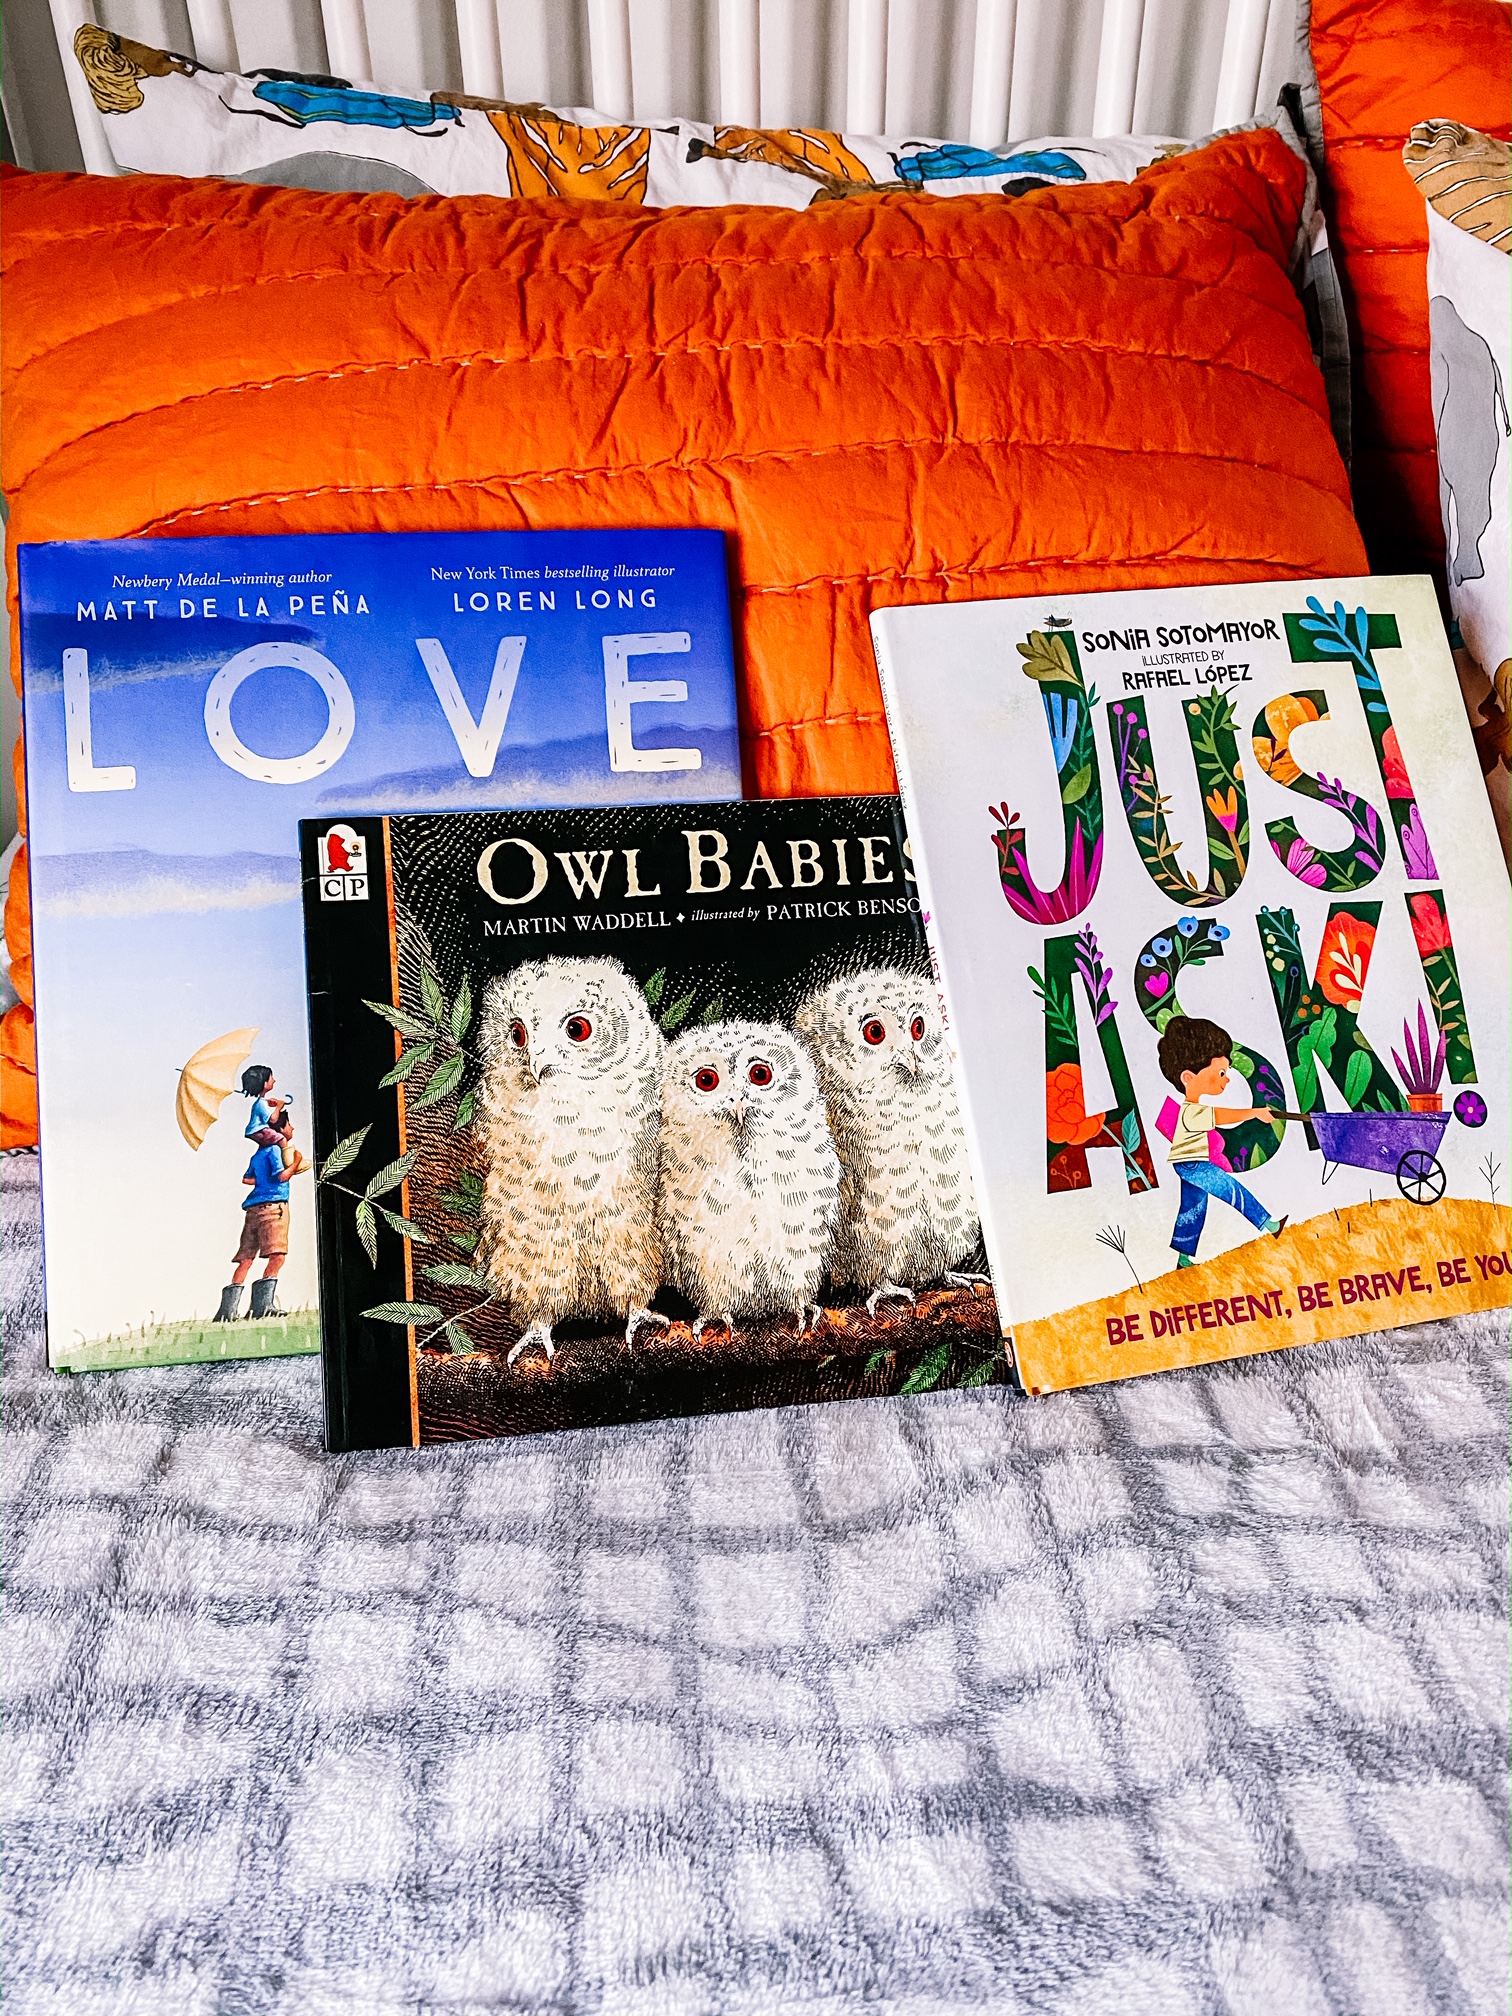 Amazing gender neutral baby books for baby's first library, including LOVE, Owl Babies, Just Ask and more.